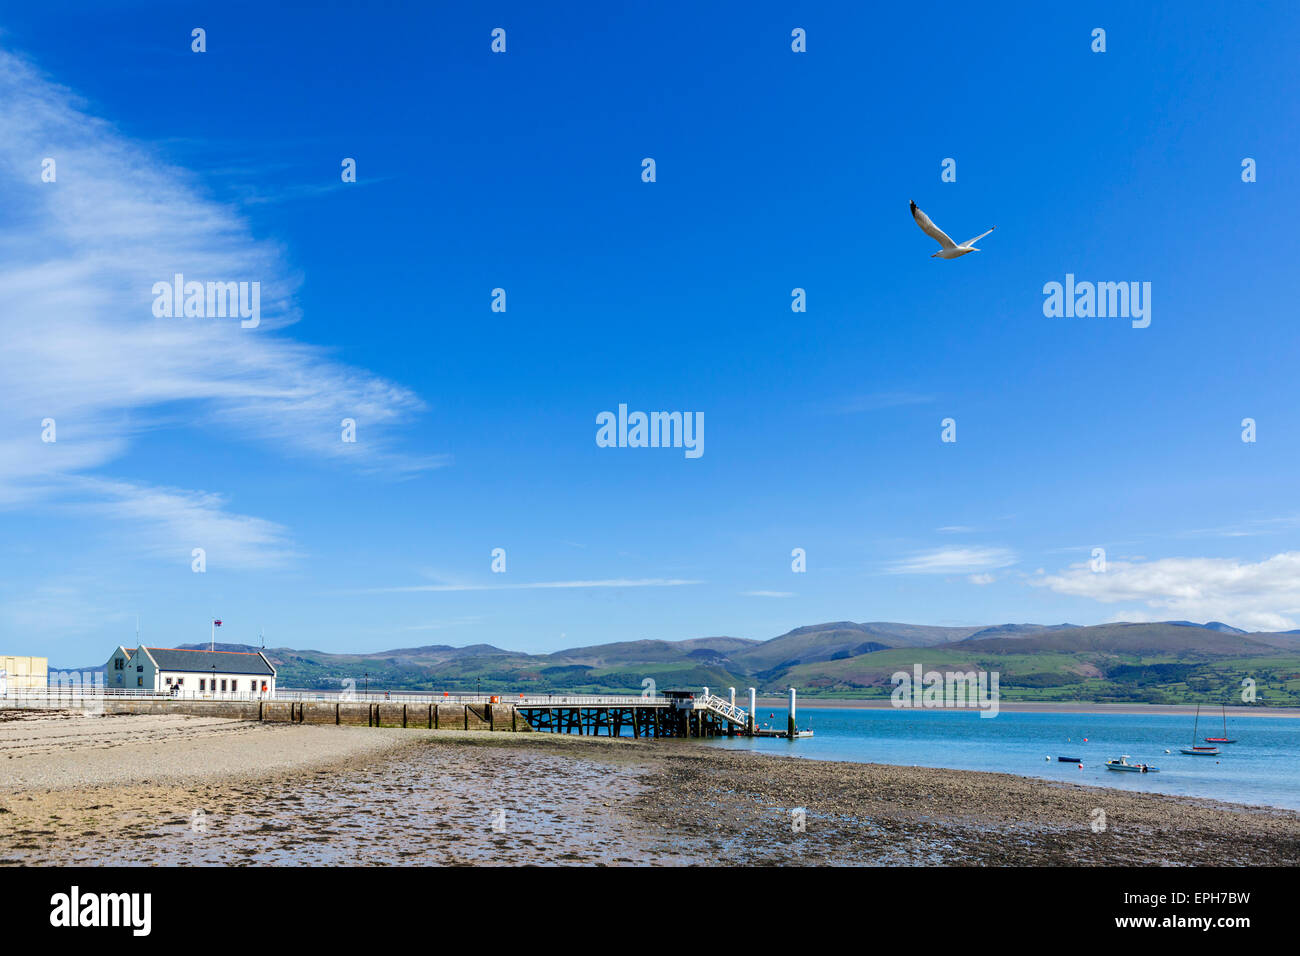 The pier in Beaumaris looking over the Menai Strait to Snowdonia in the distance, Anglesey, Wales, UK Stock Photo